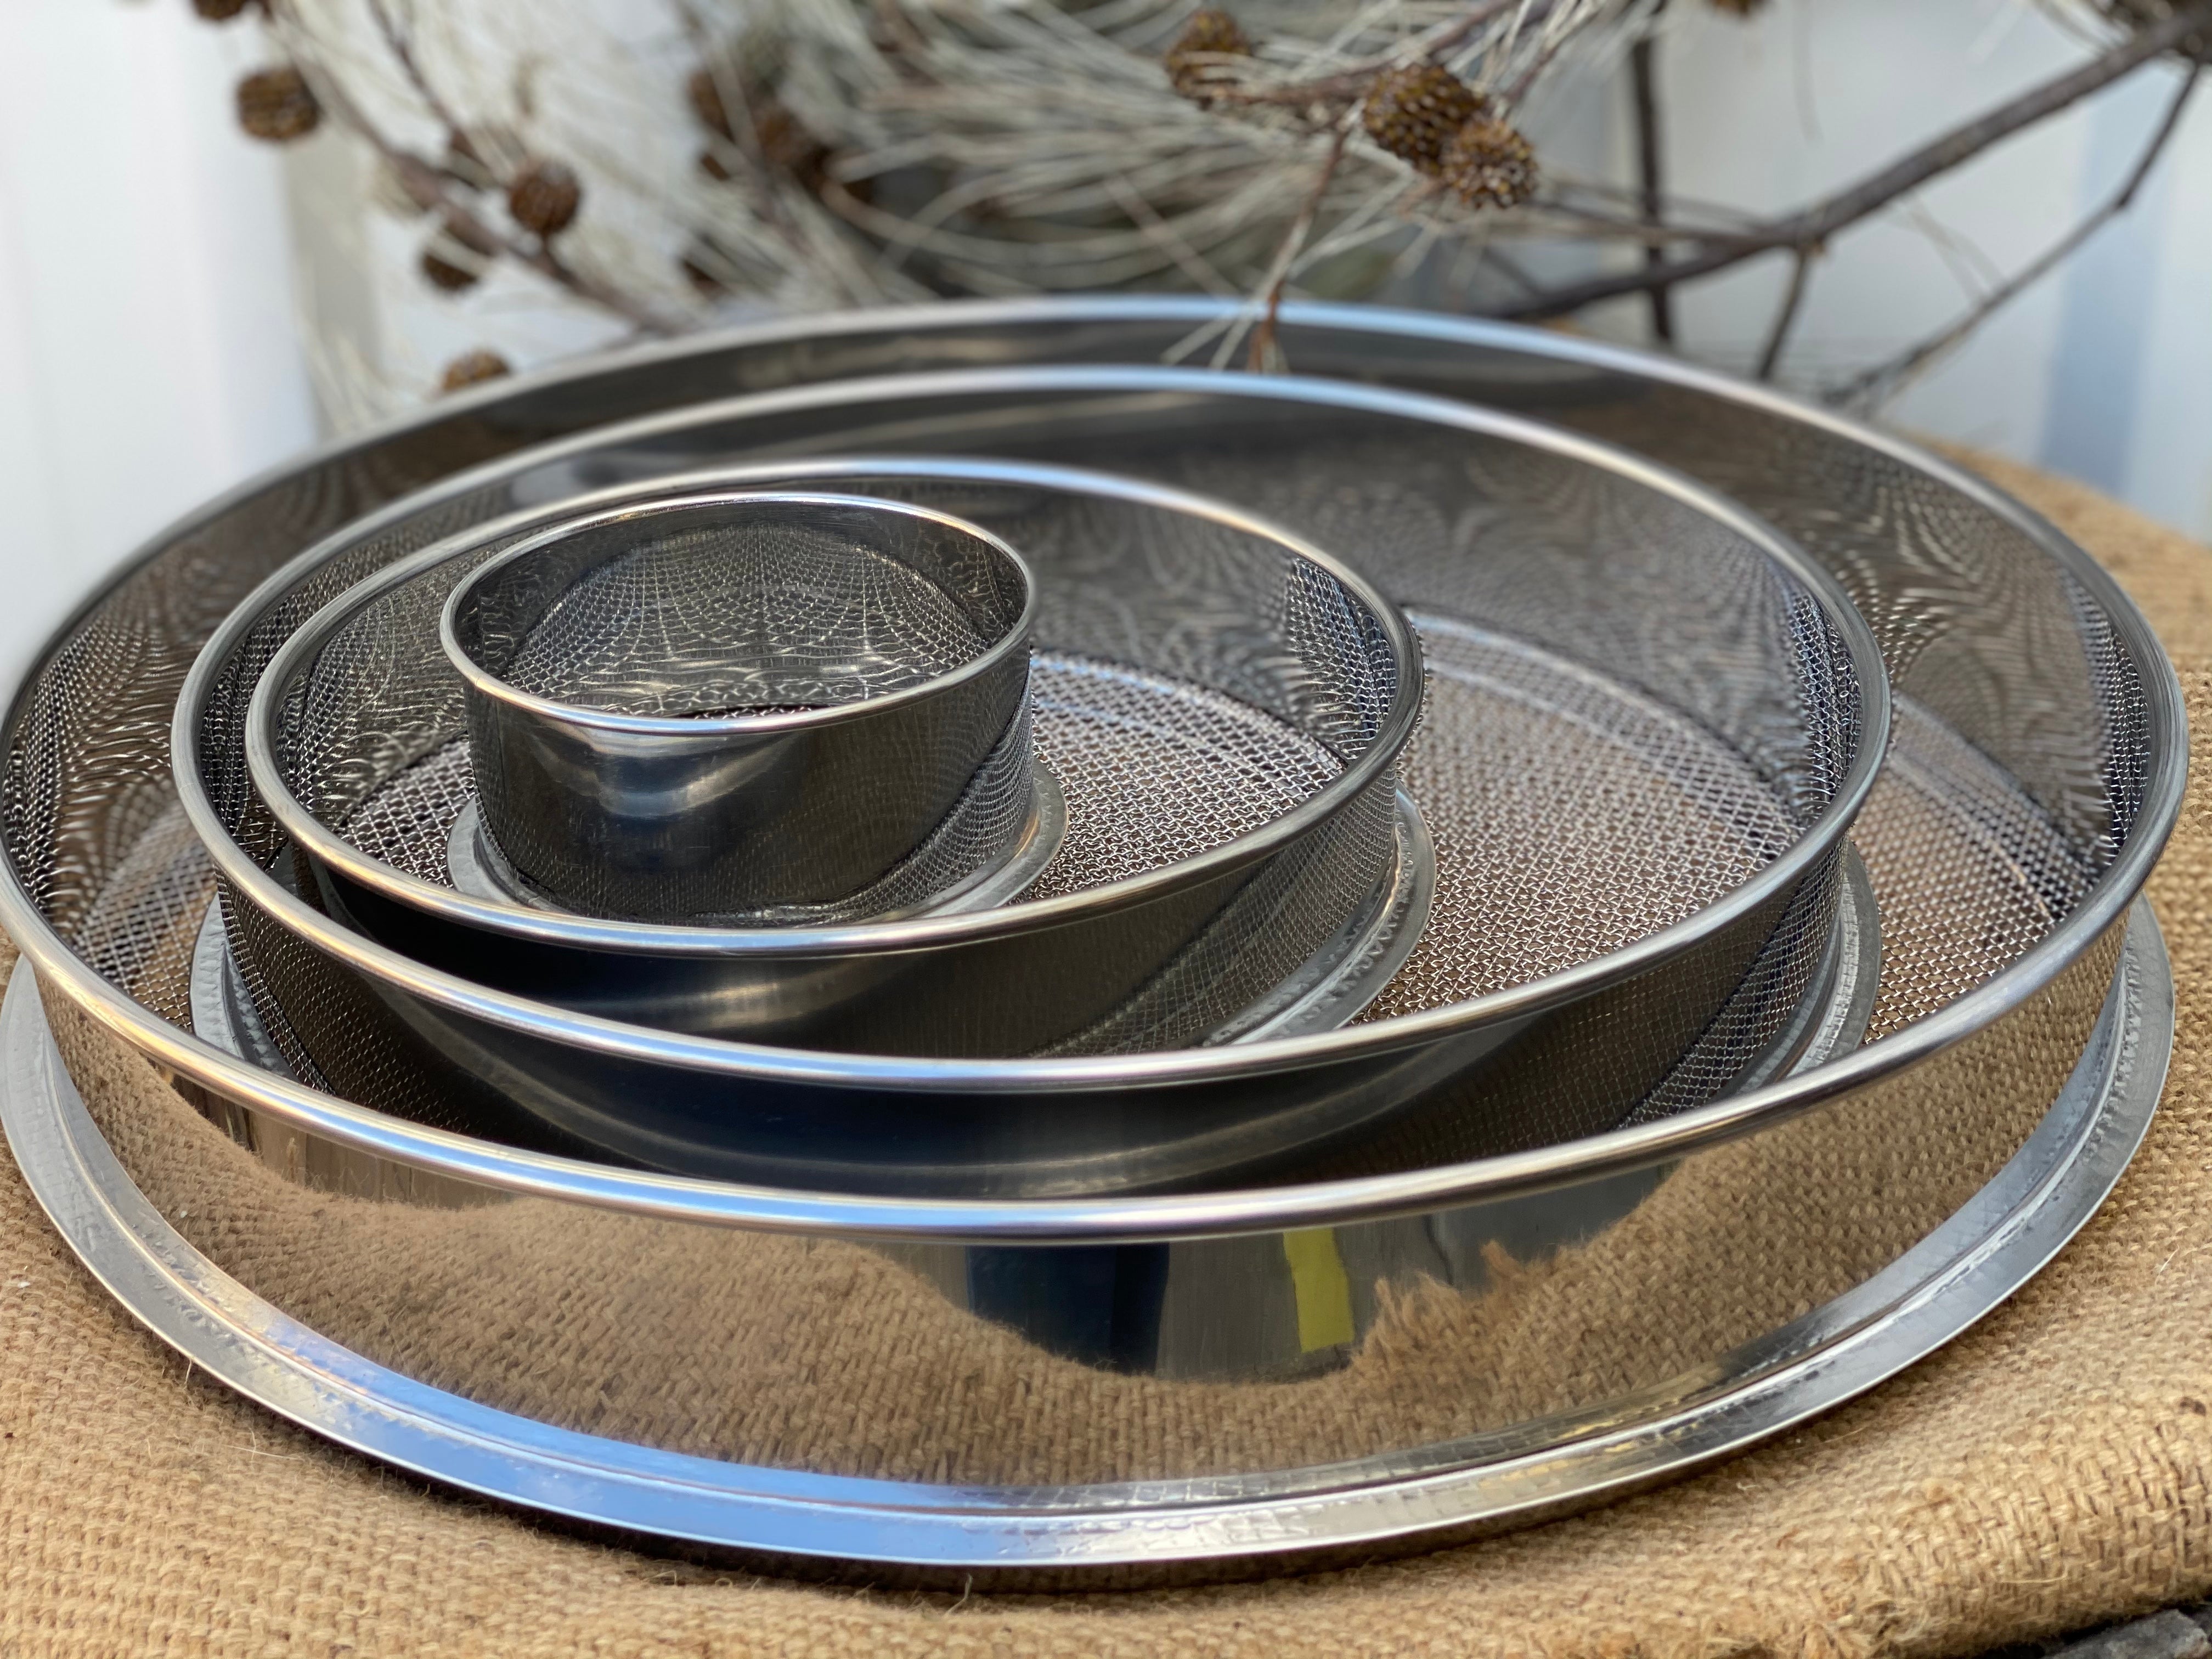 Stainless Steel Sieve SET 4 FREE Shipping